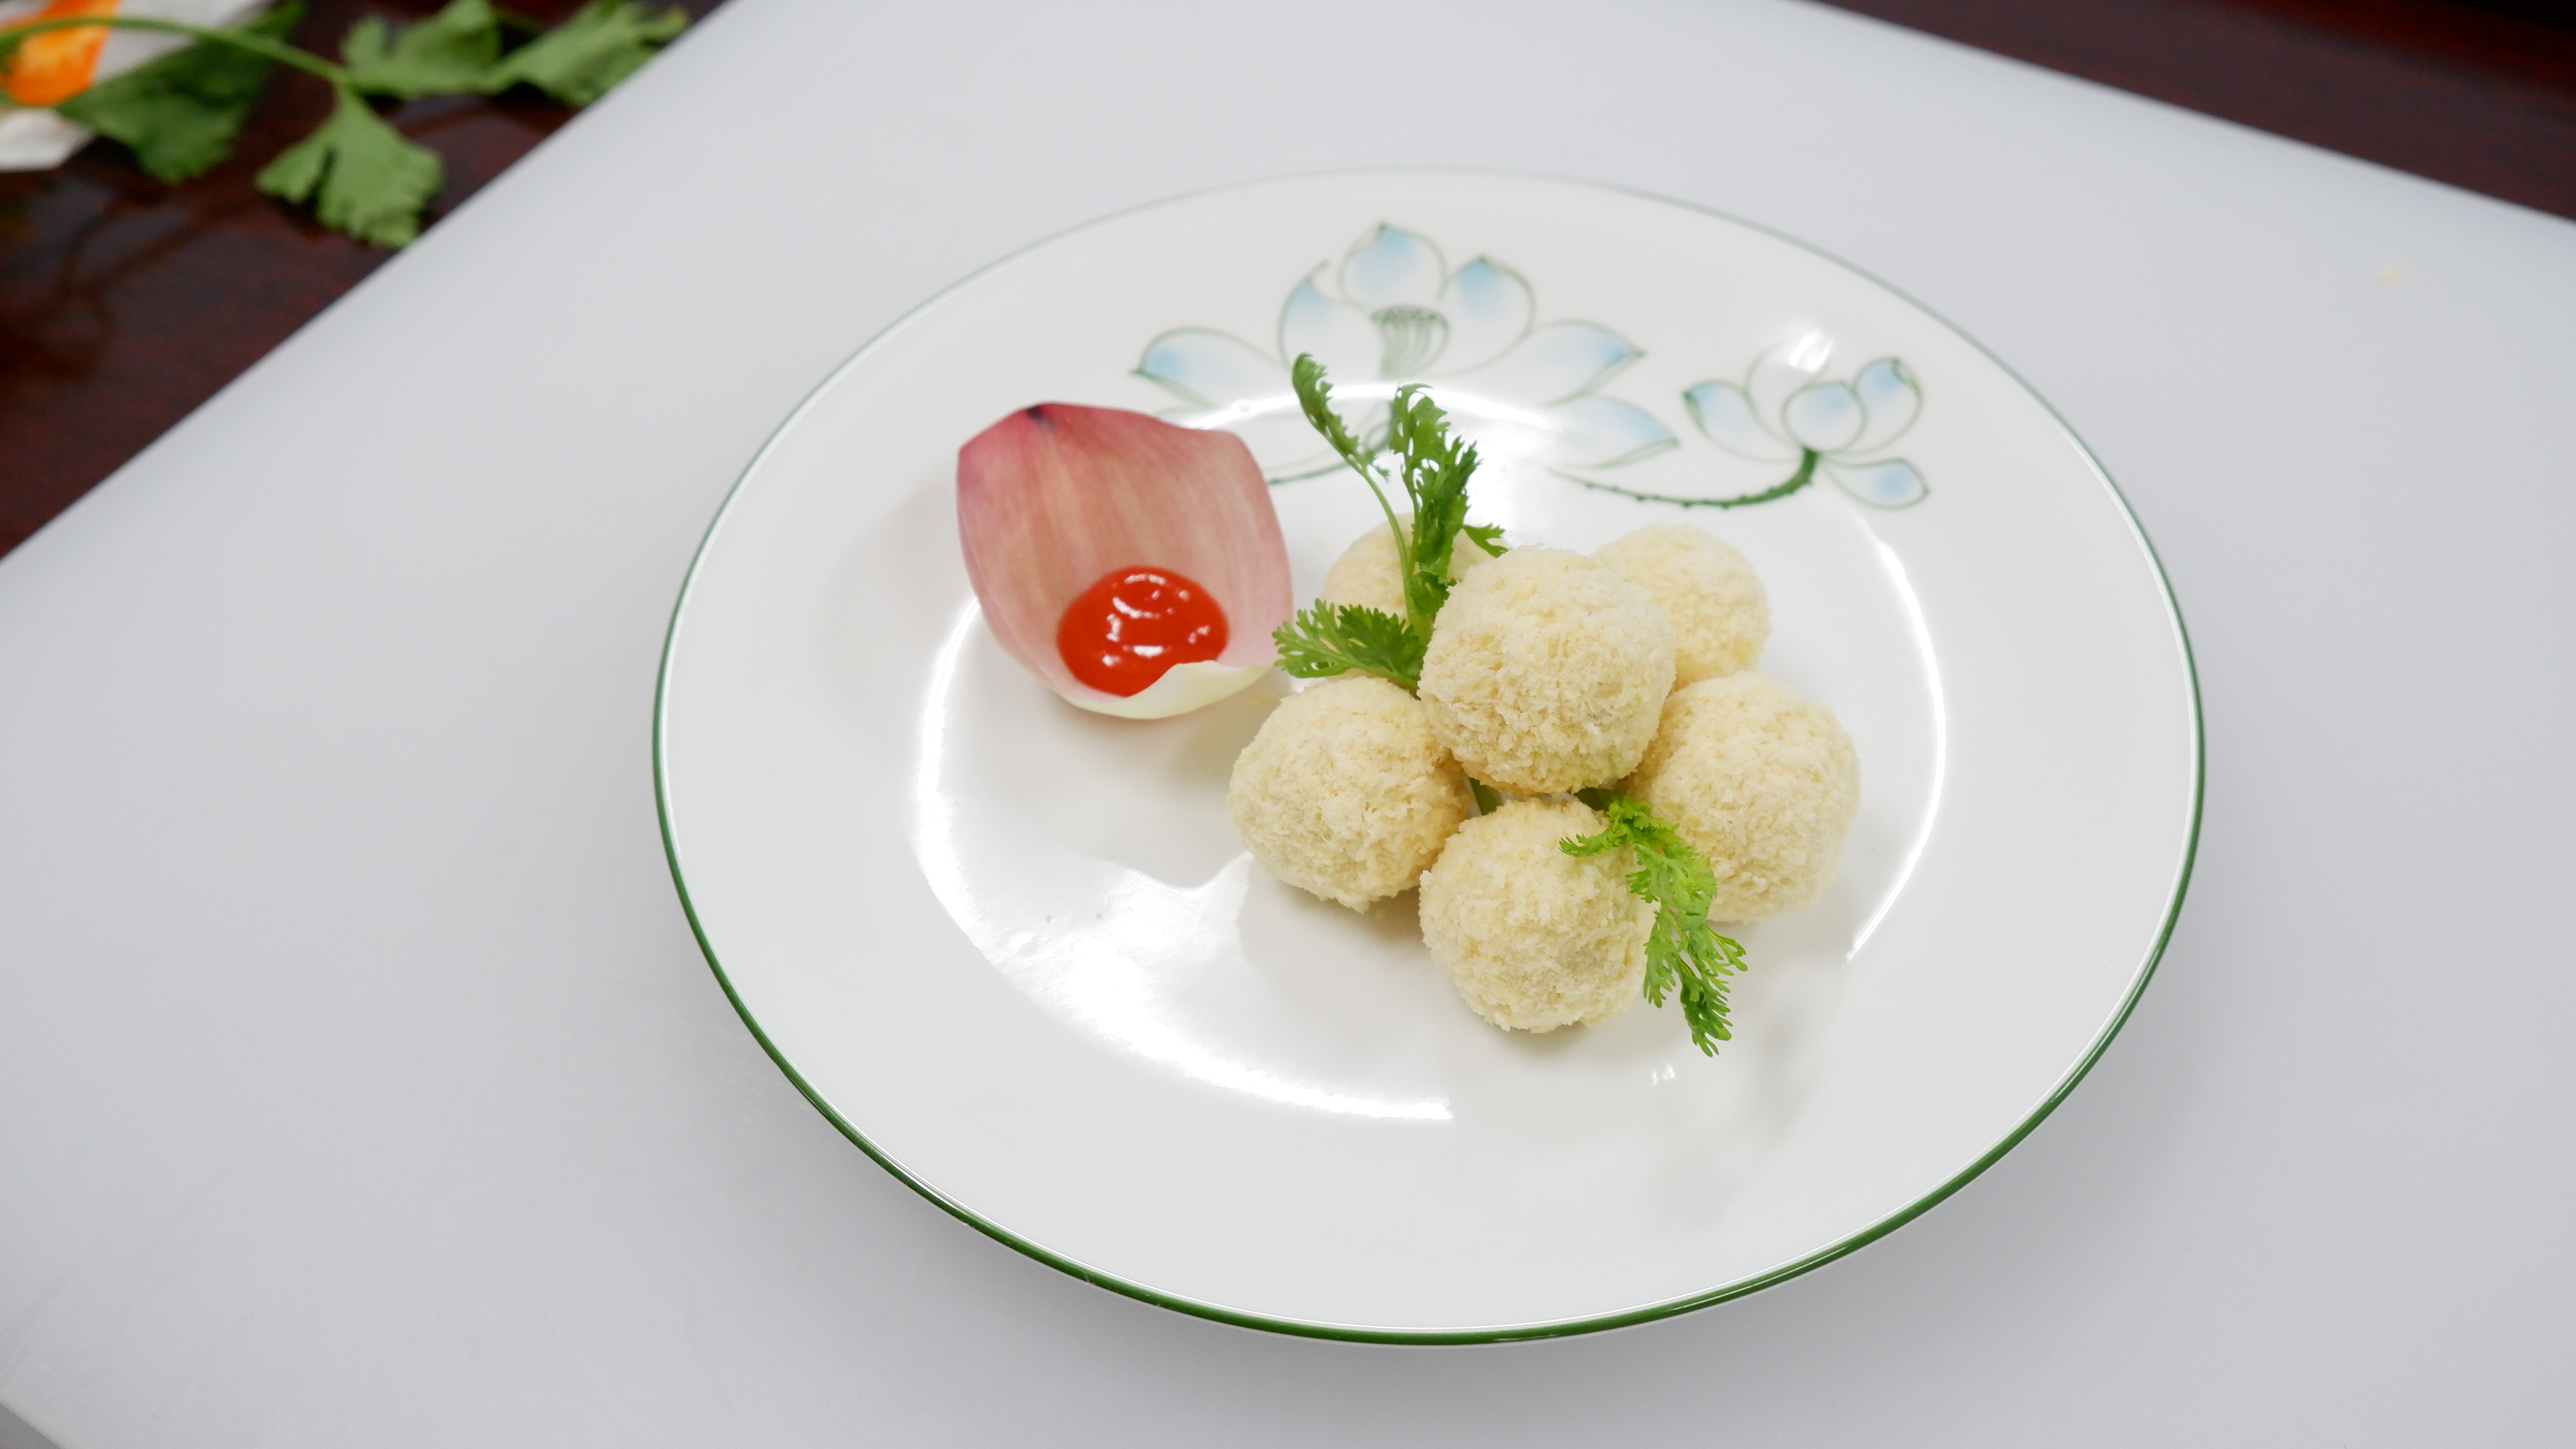 <span  class="uc_style_uc_tiles_grid_image_elementor_uc_items_attribute_title" style="color:#ffffff;">Pangasius Fish Ball</span>